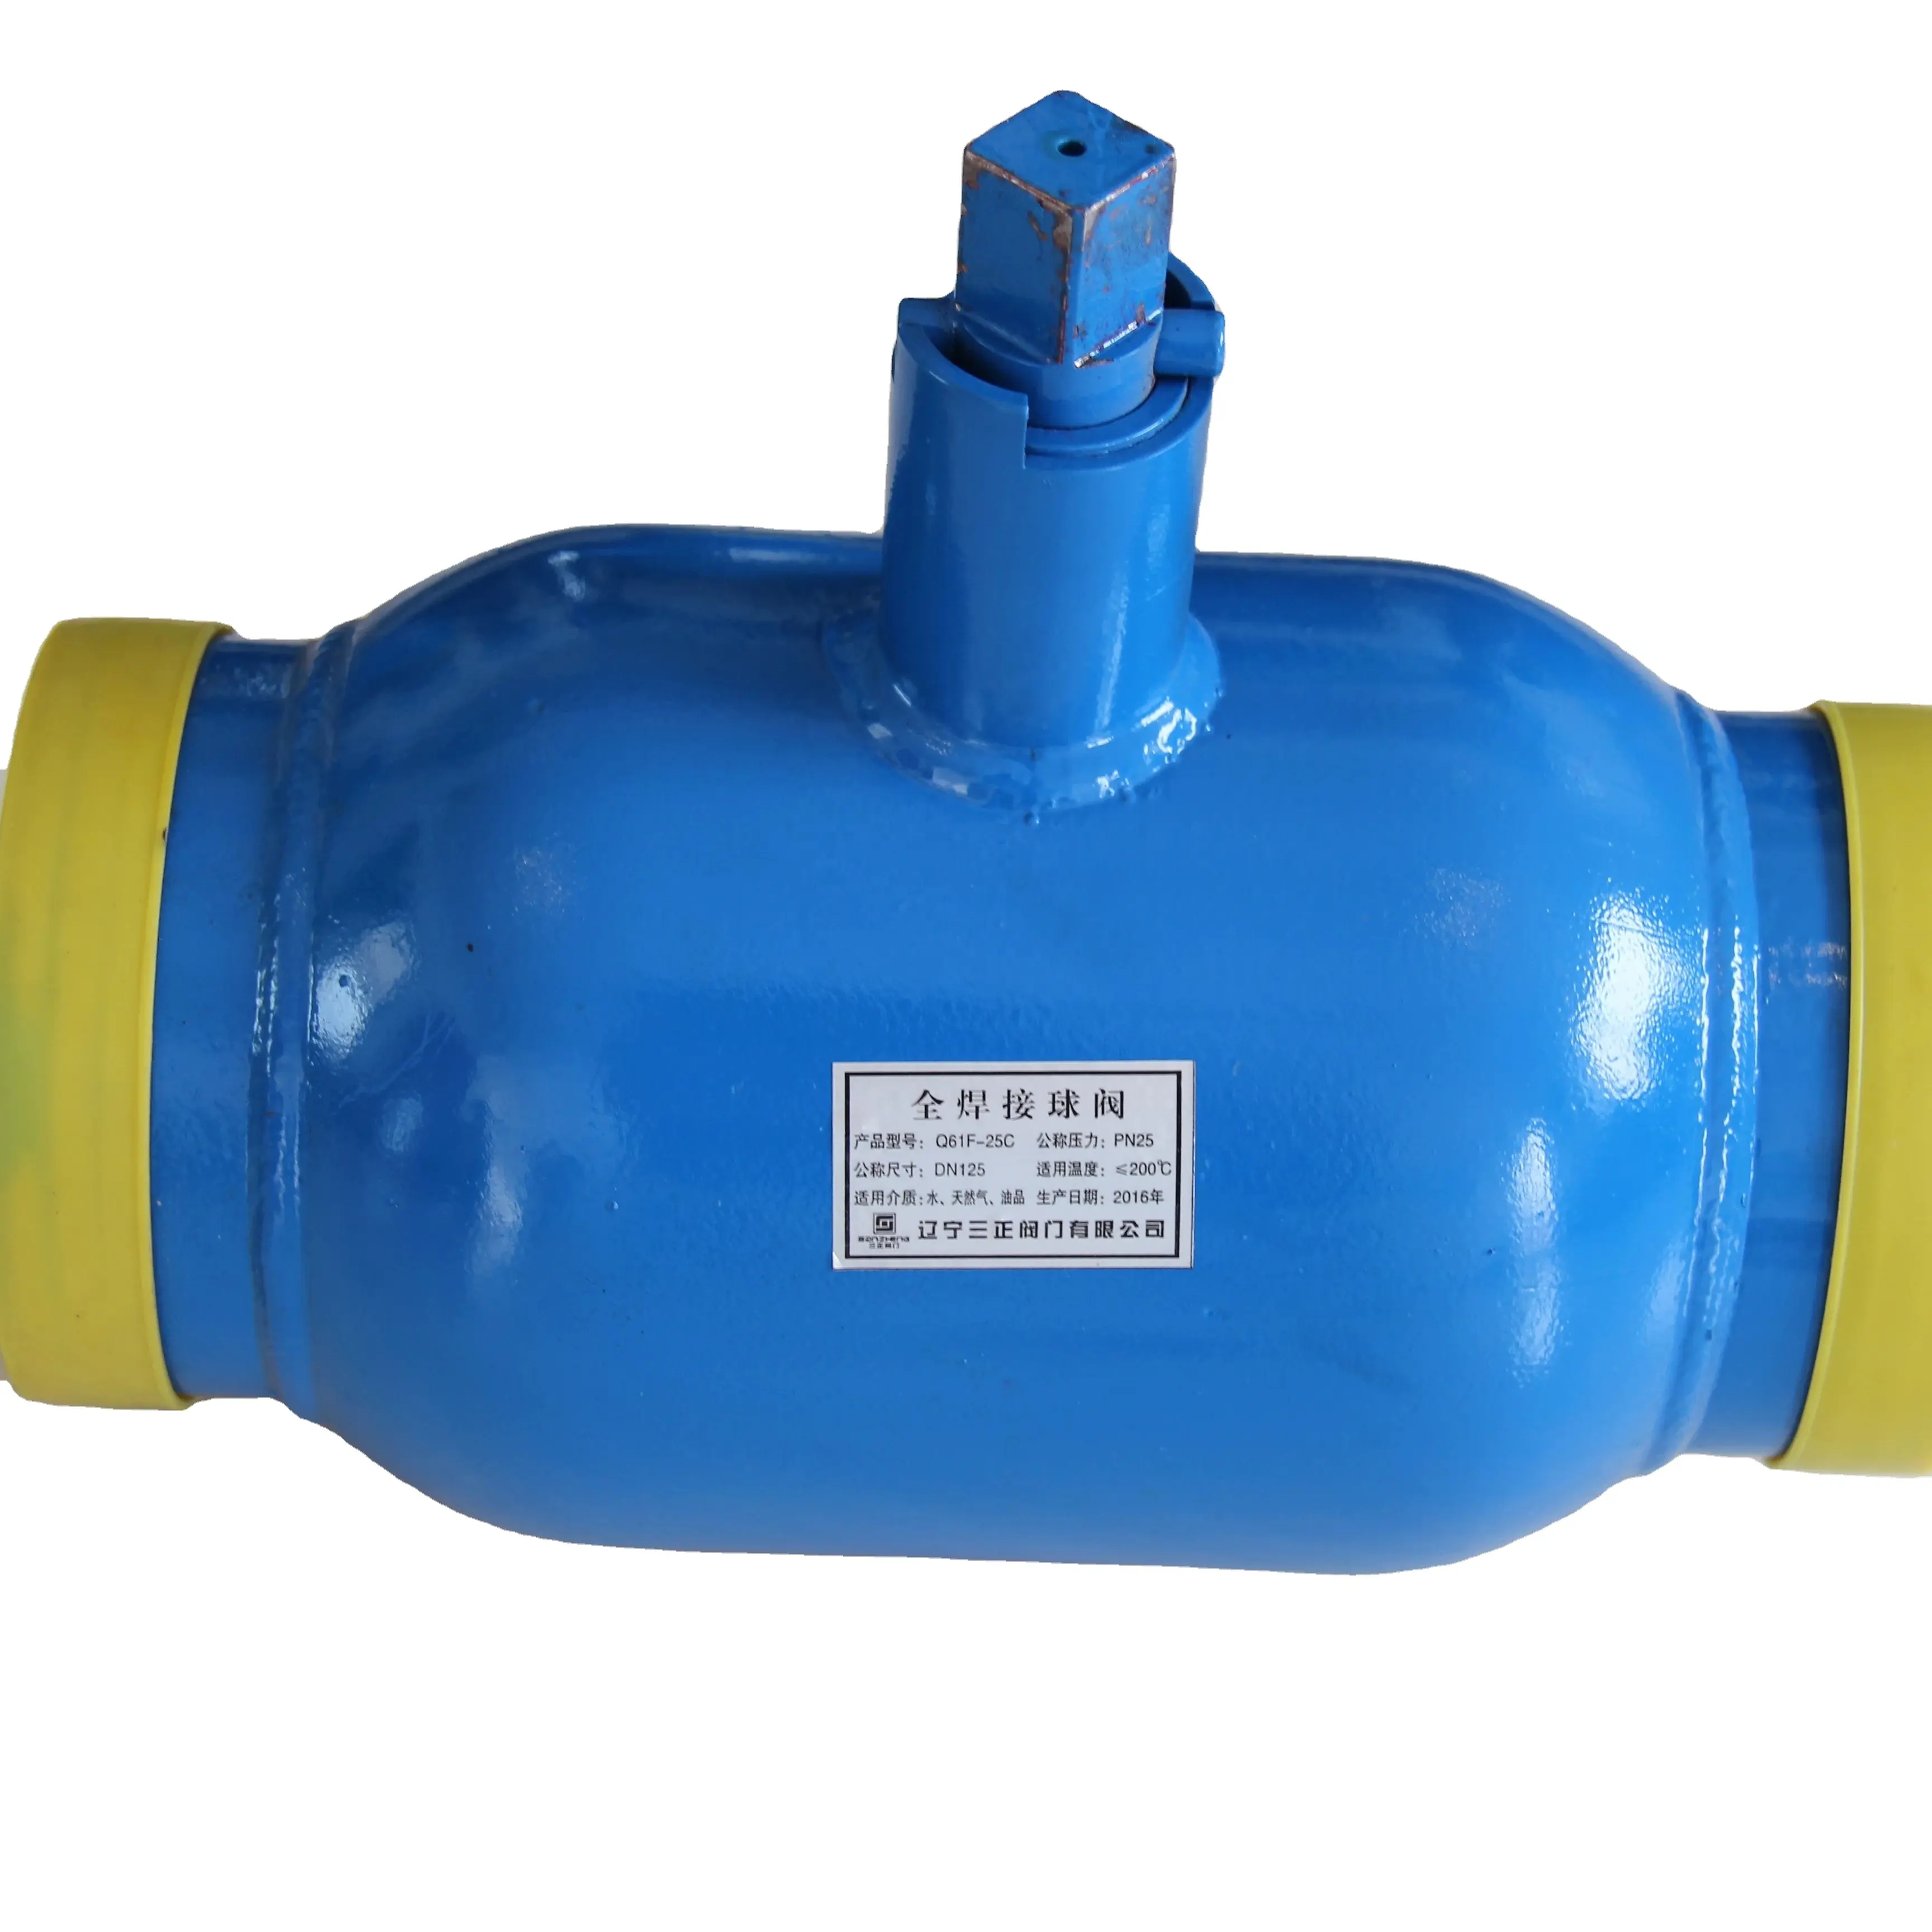 STAINLESS STEEL SOFT SEAL REDUCED DIAMETER FLANGE BALL VALVE Q361F DN 250 WATER/GAS WITH LOW PRESSURE PRODUCED IN LIAONING